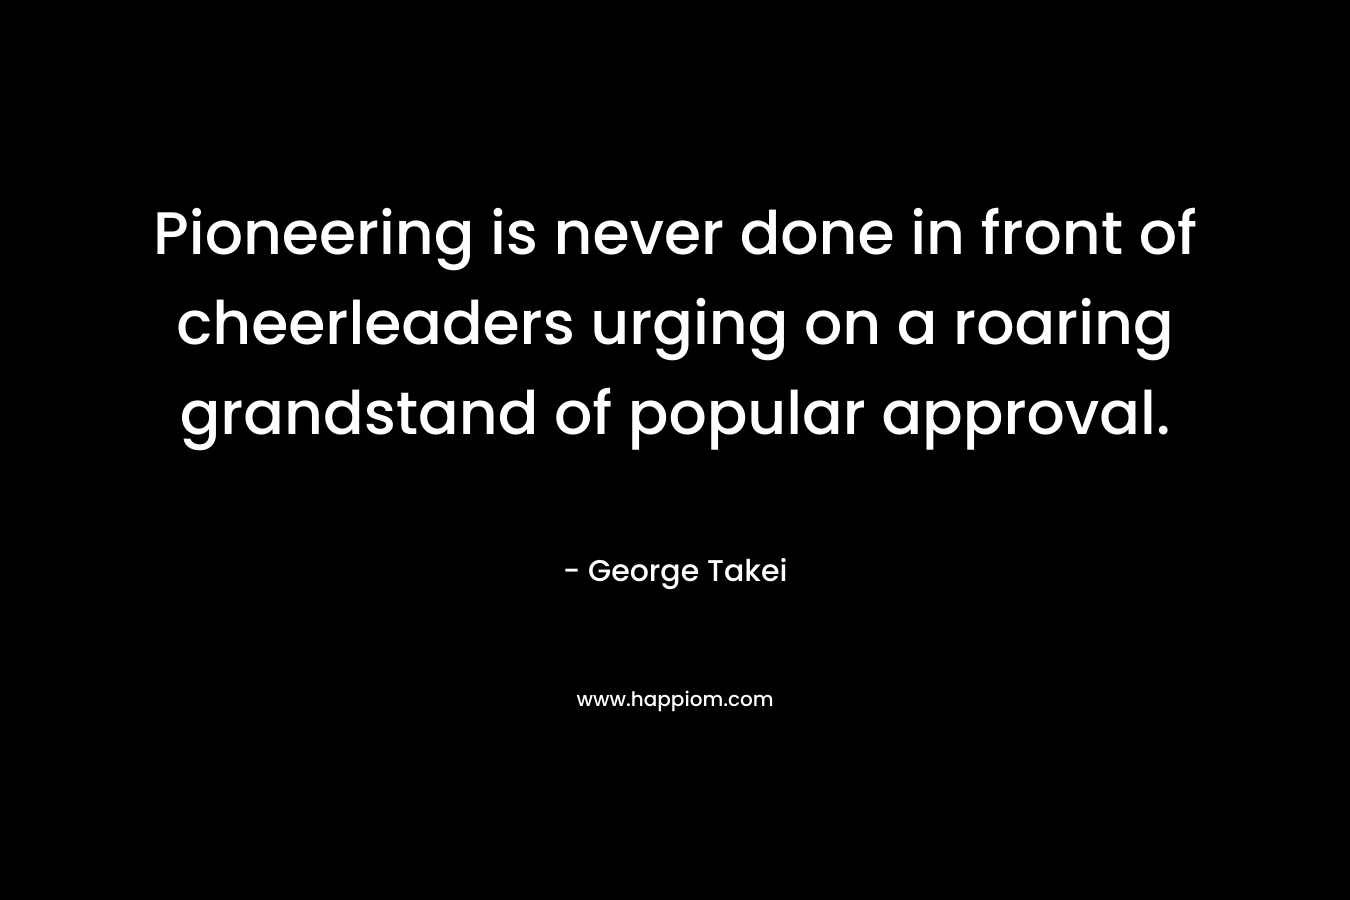 Pioneering is never done in front of cheerleaders urging on a roaring grandstand of popular approval. – George Takei